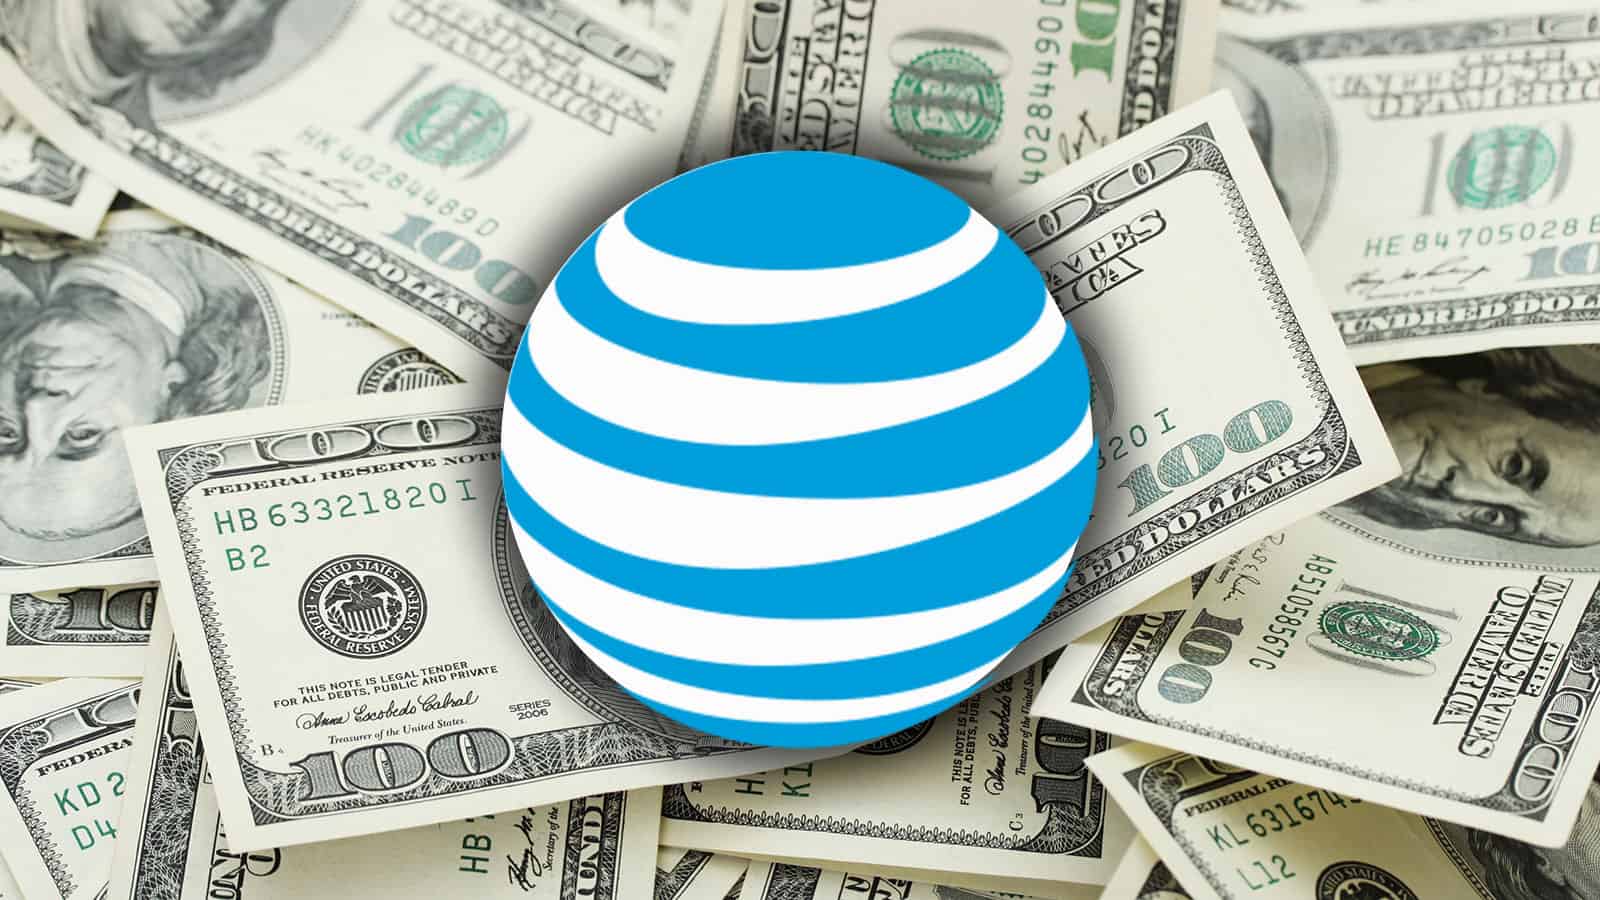 AT&T Raising iPhone's Grandfathered Unlimited Data Plan to $45/month